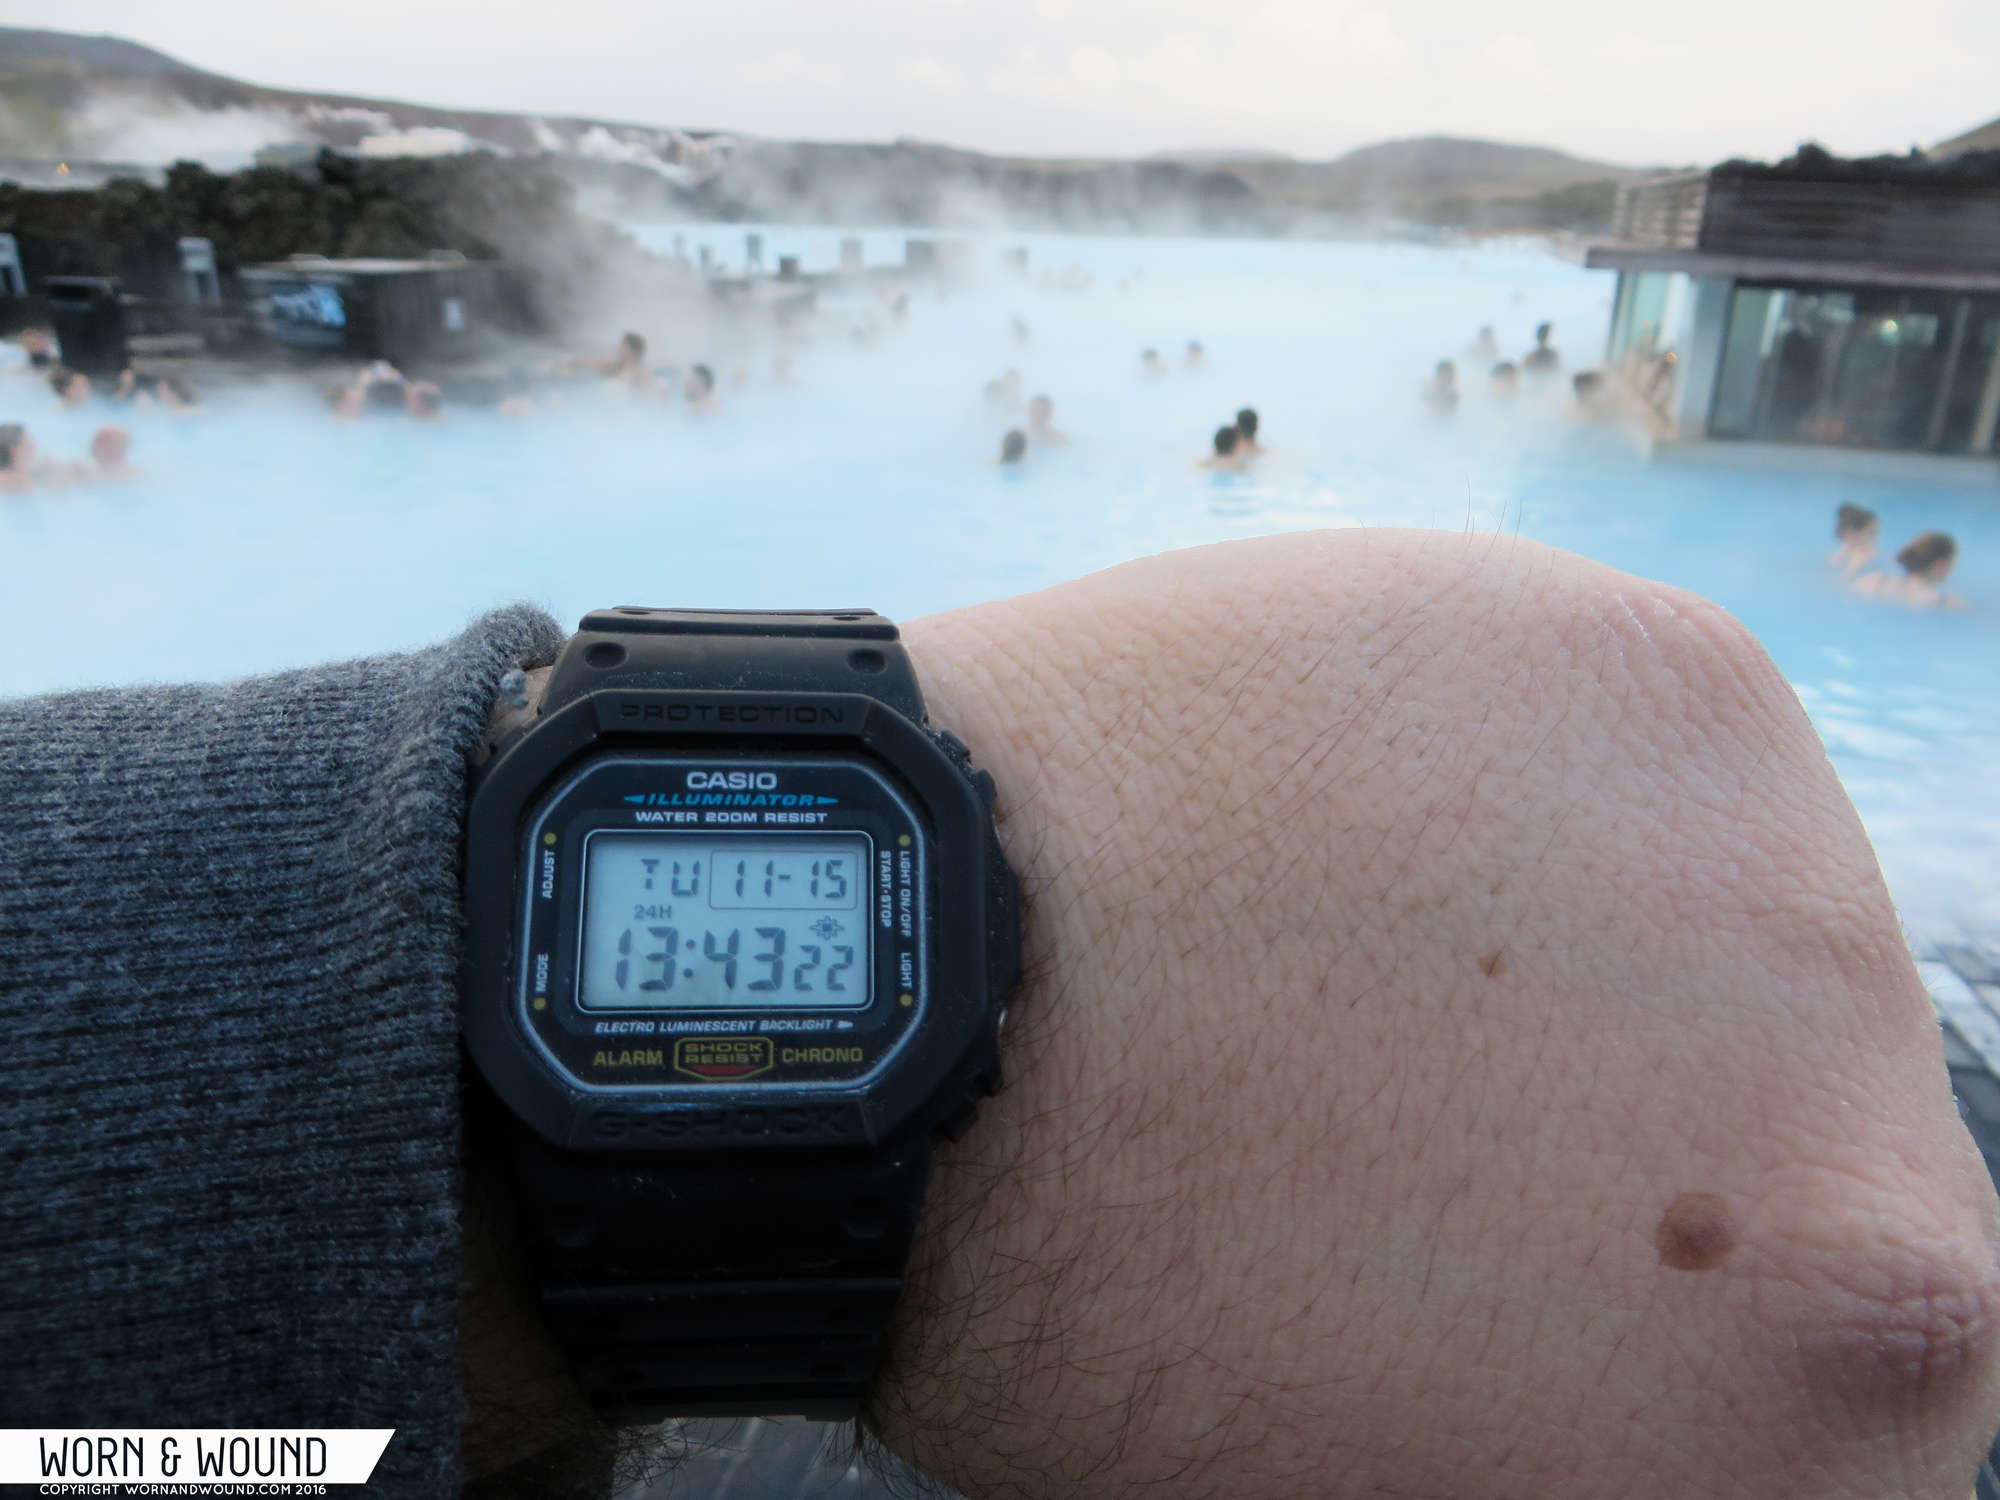 Field Test: the Casio G-Shock DW-5600E-1V Braves the Elements in 